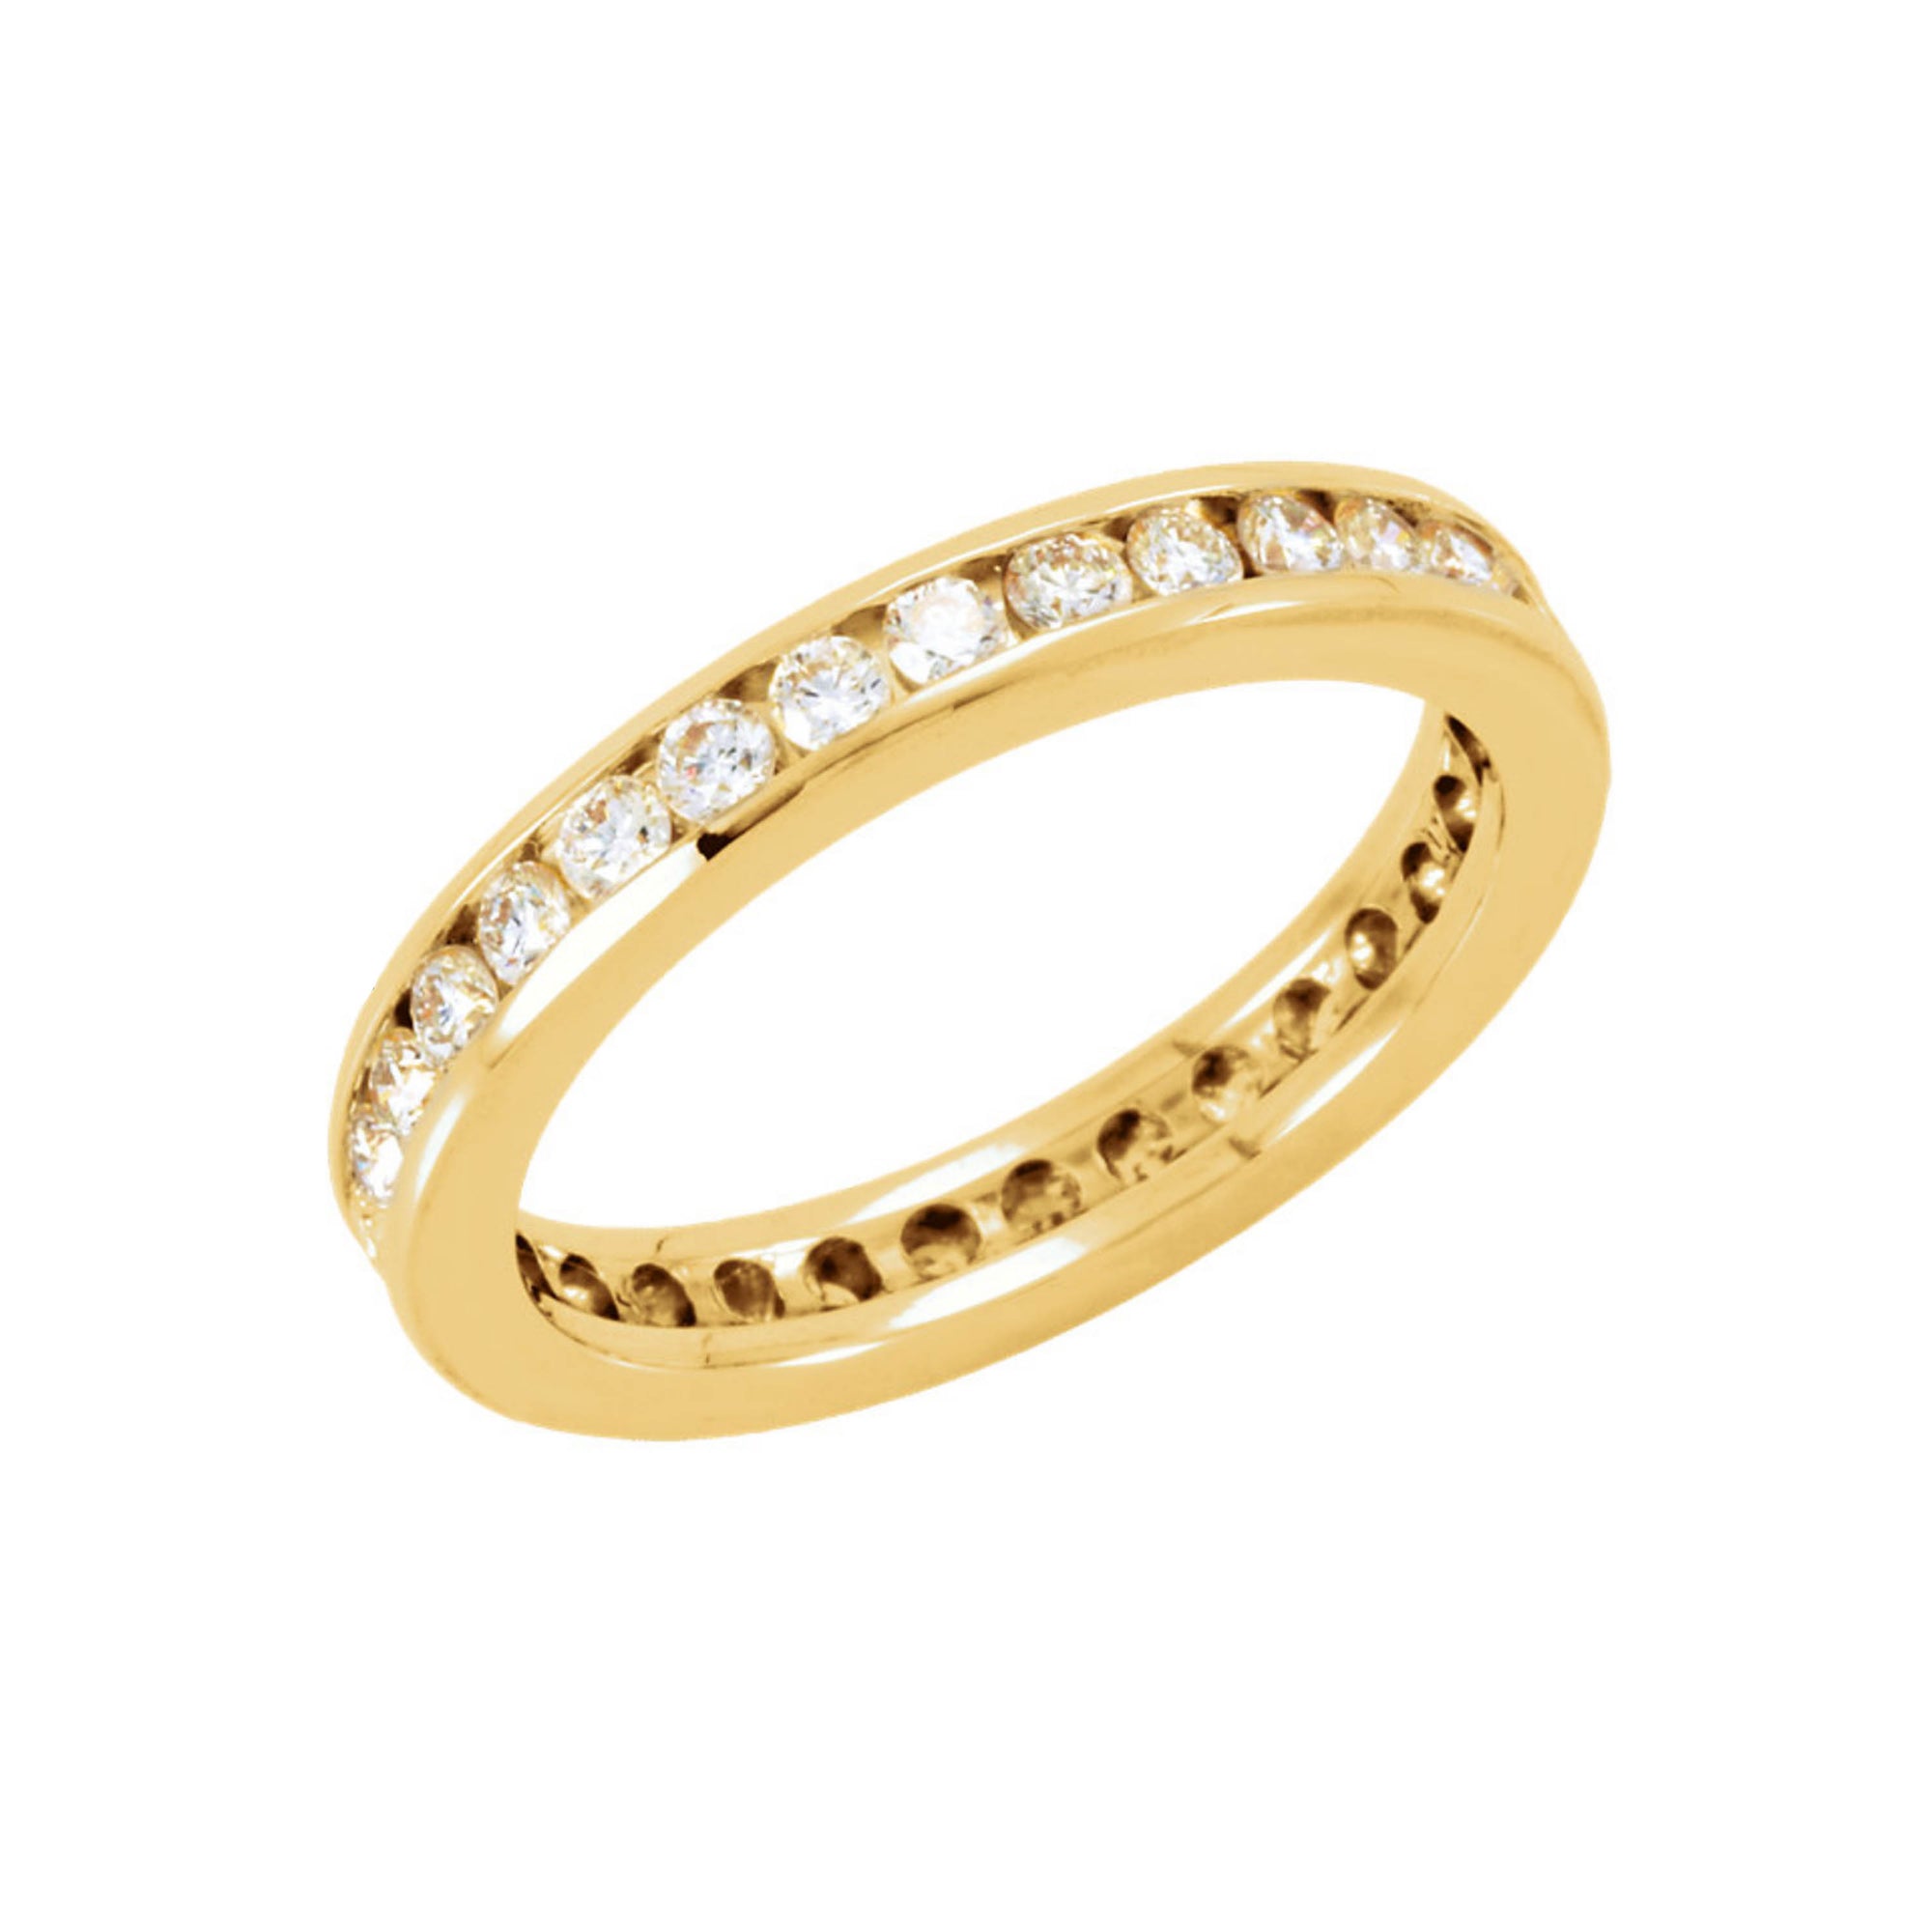 Diamond Channel Eternity Band in White or Yellow Gold, 1.00 Carat Total Weight - Talisman Collection Fine Jewelers